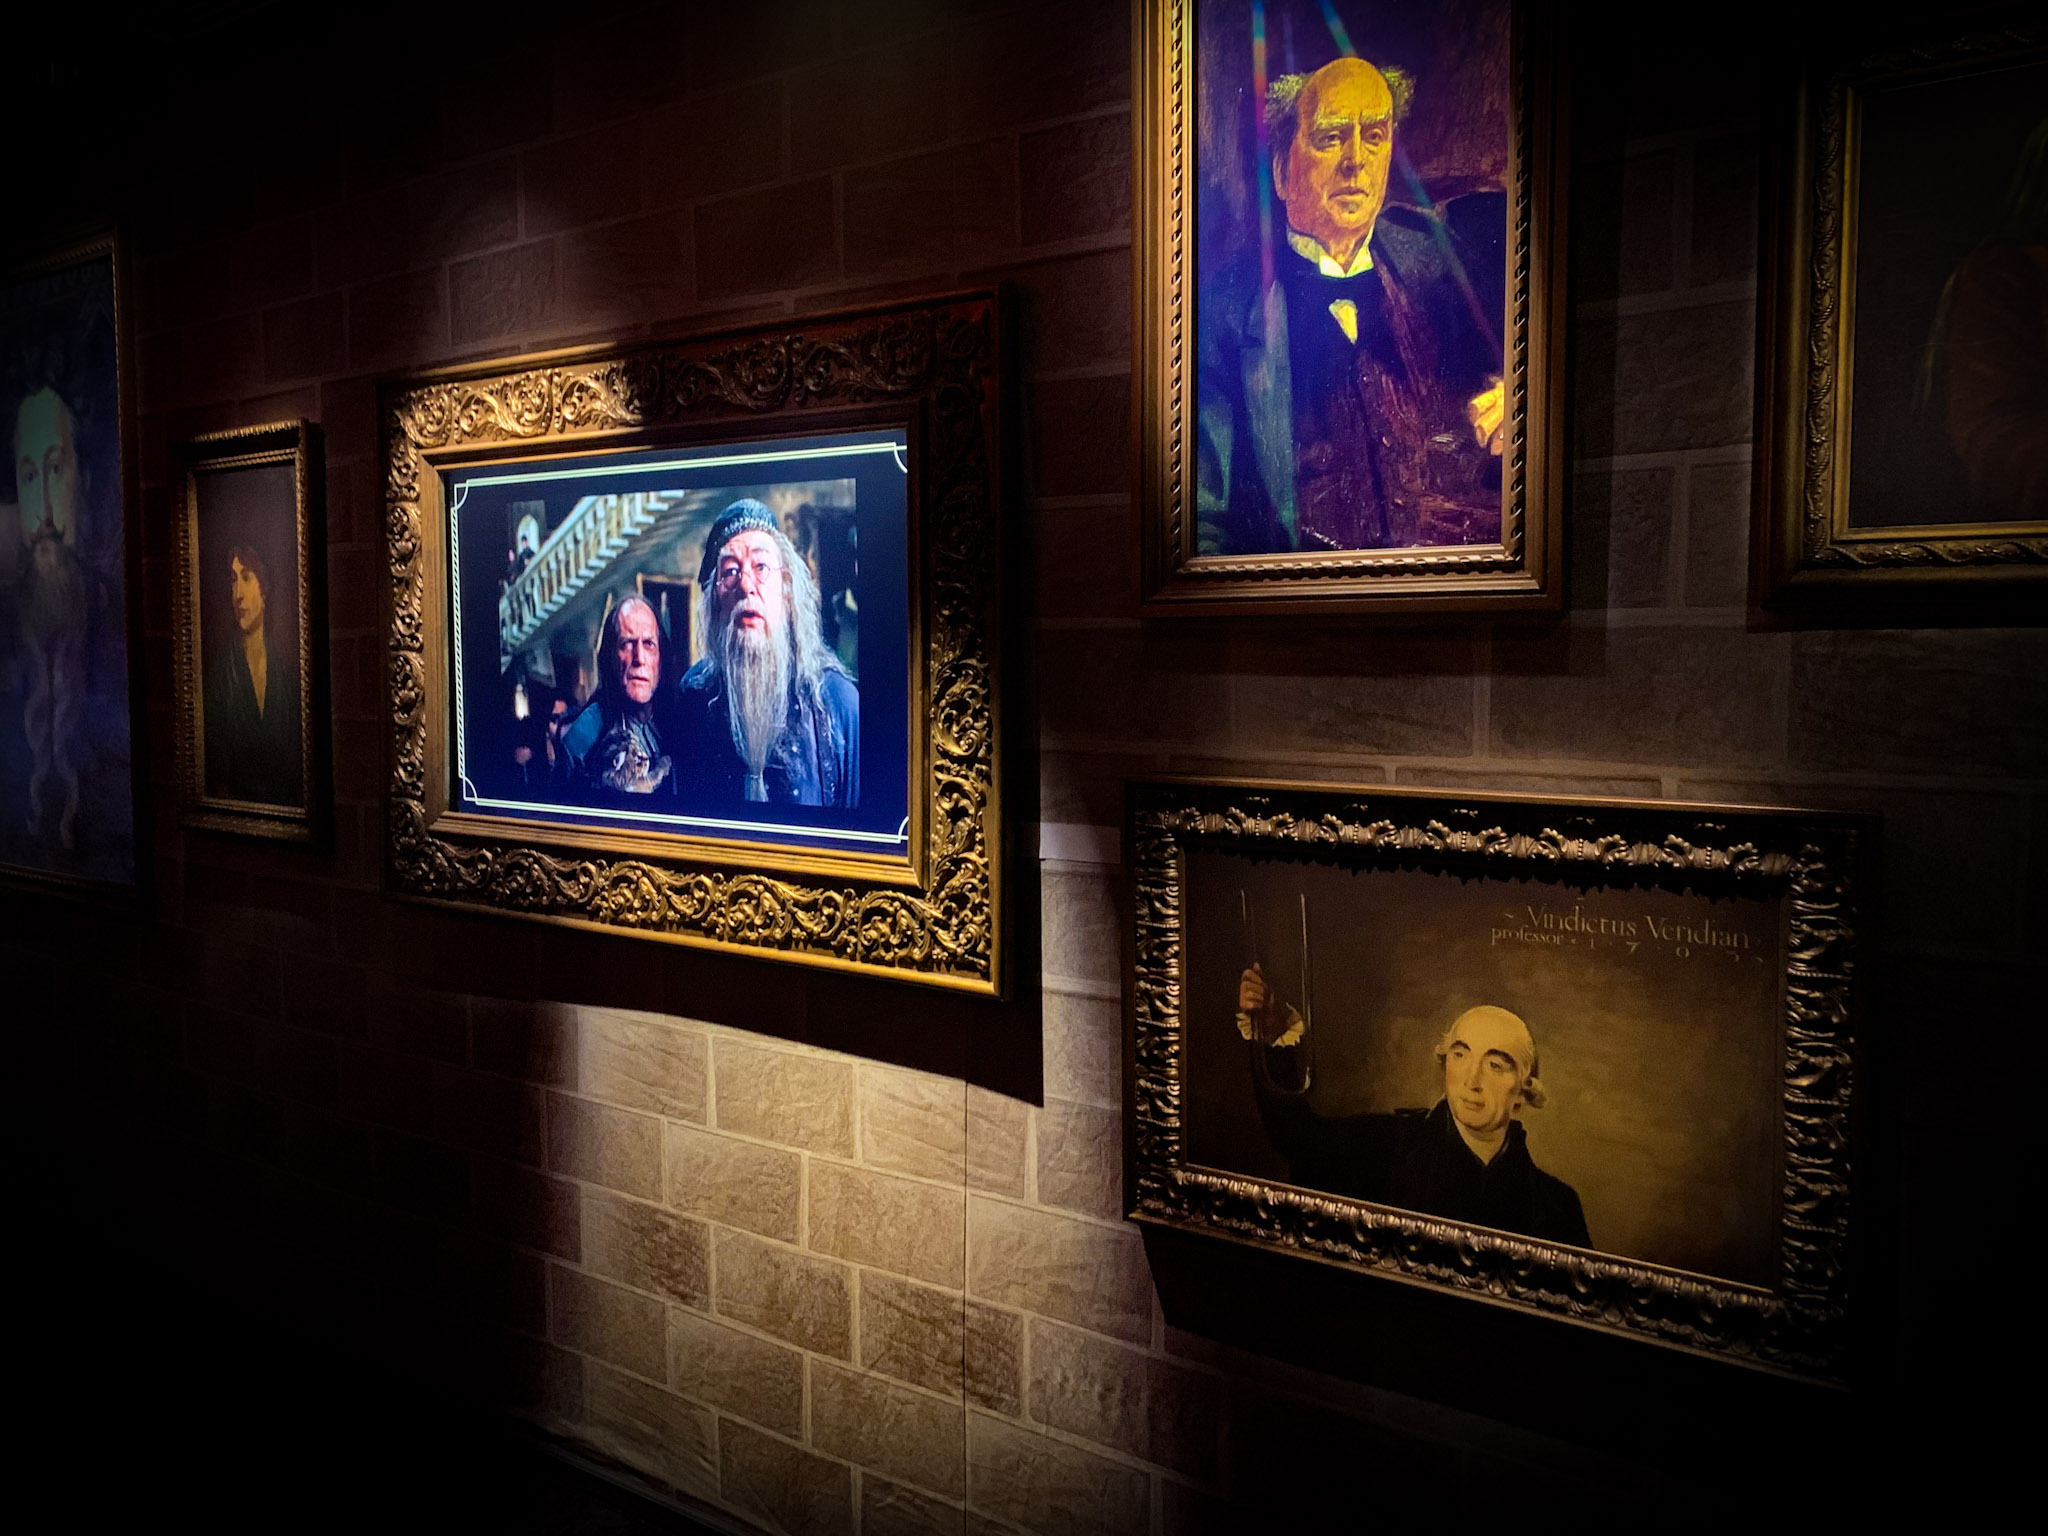 A first look at the incredibly immersive 'Harry Potter: The